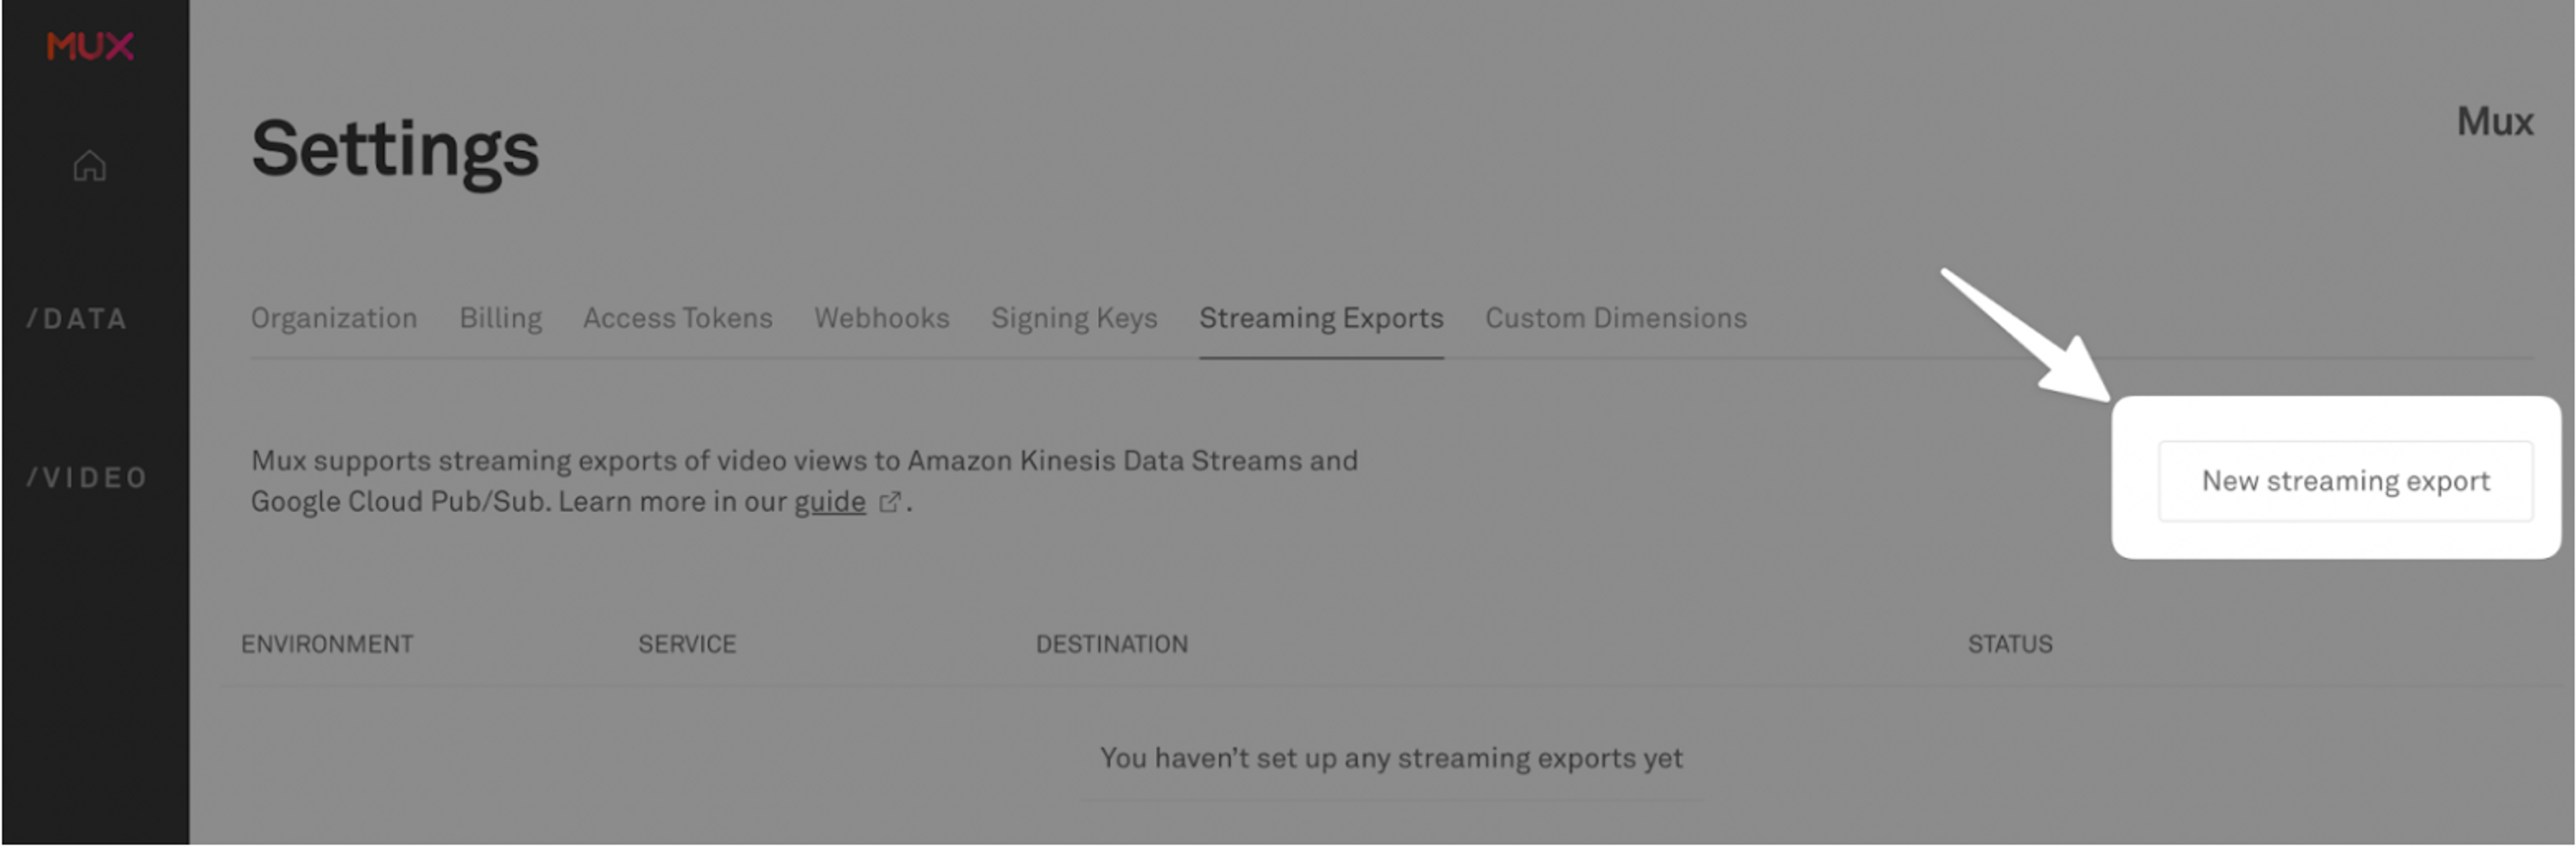 Settings page with a "New streaming export" button in focus on the right.